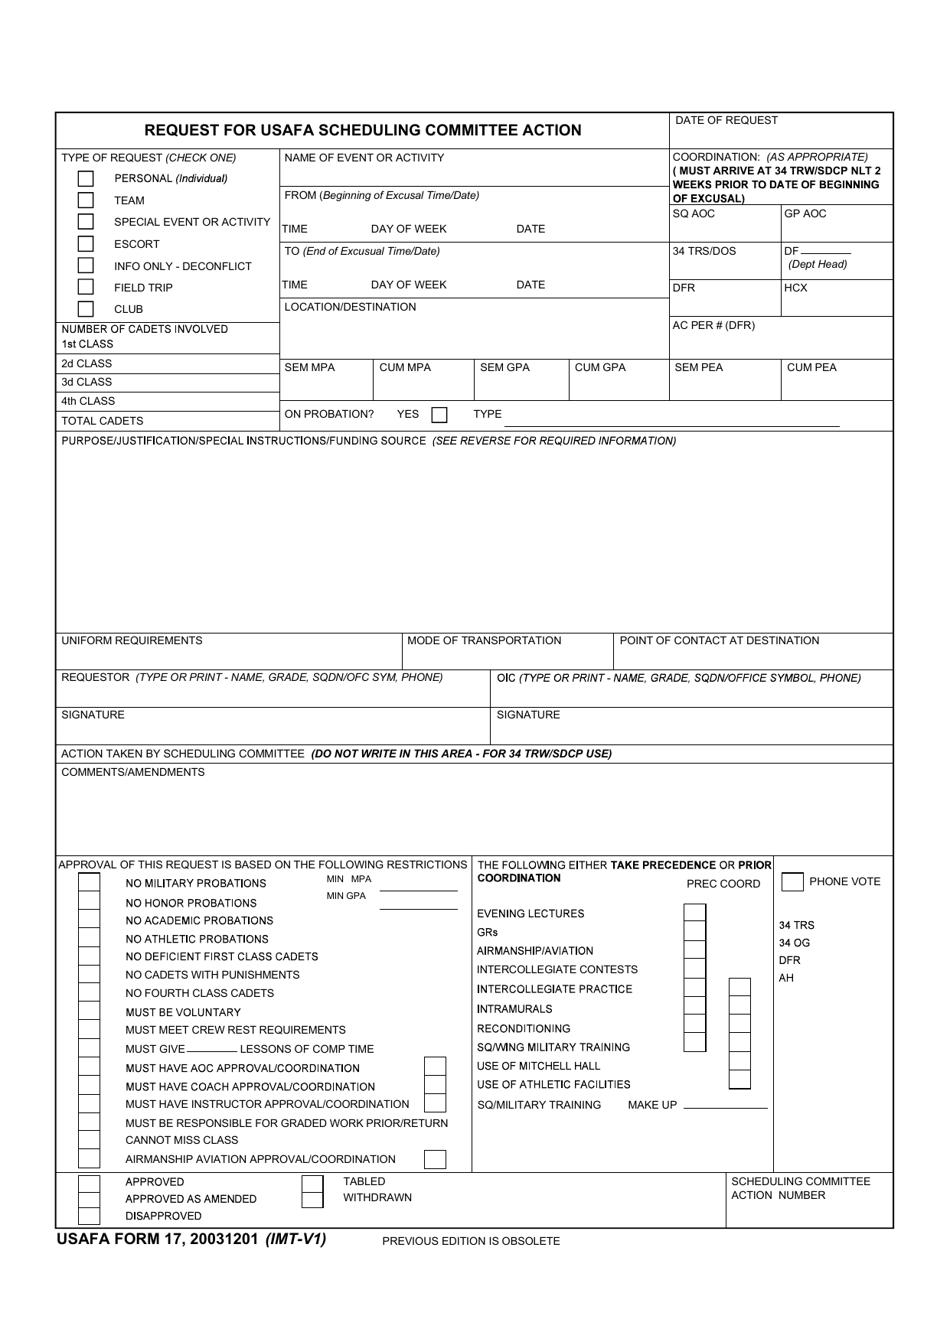 USAFA Form 17 Request for Usafa Scheduling Committee Action, Page 1